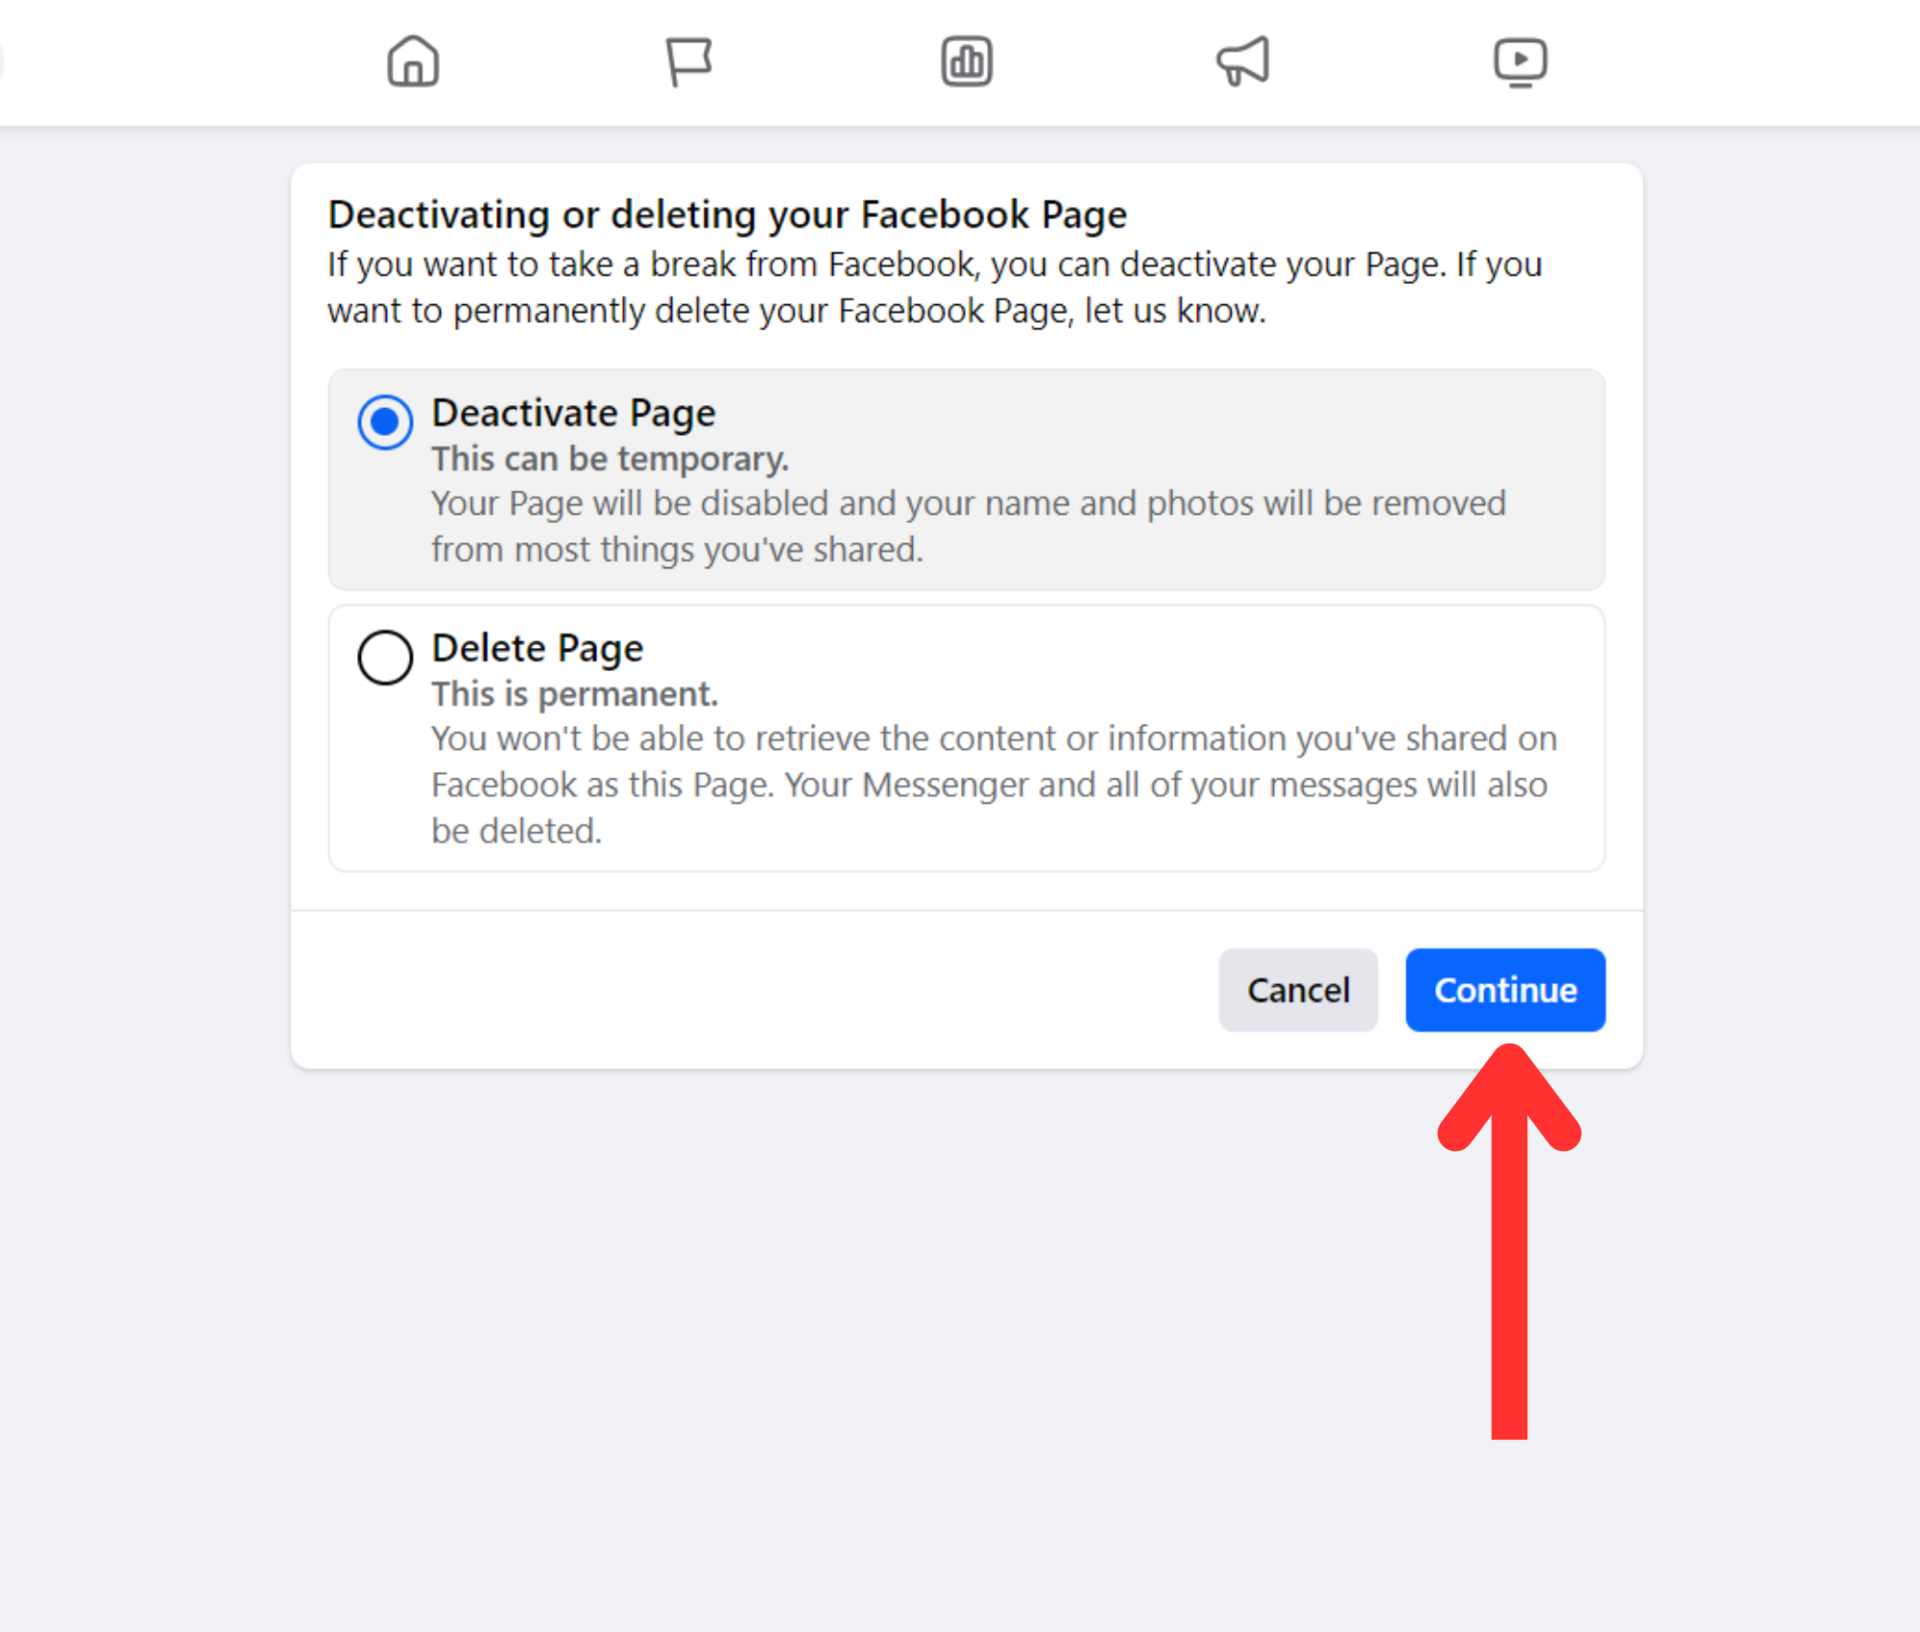 Facebook page privacy settings deactivation and deletion continue button